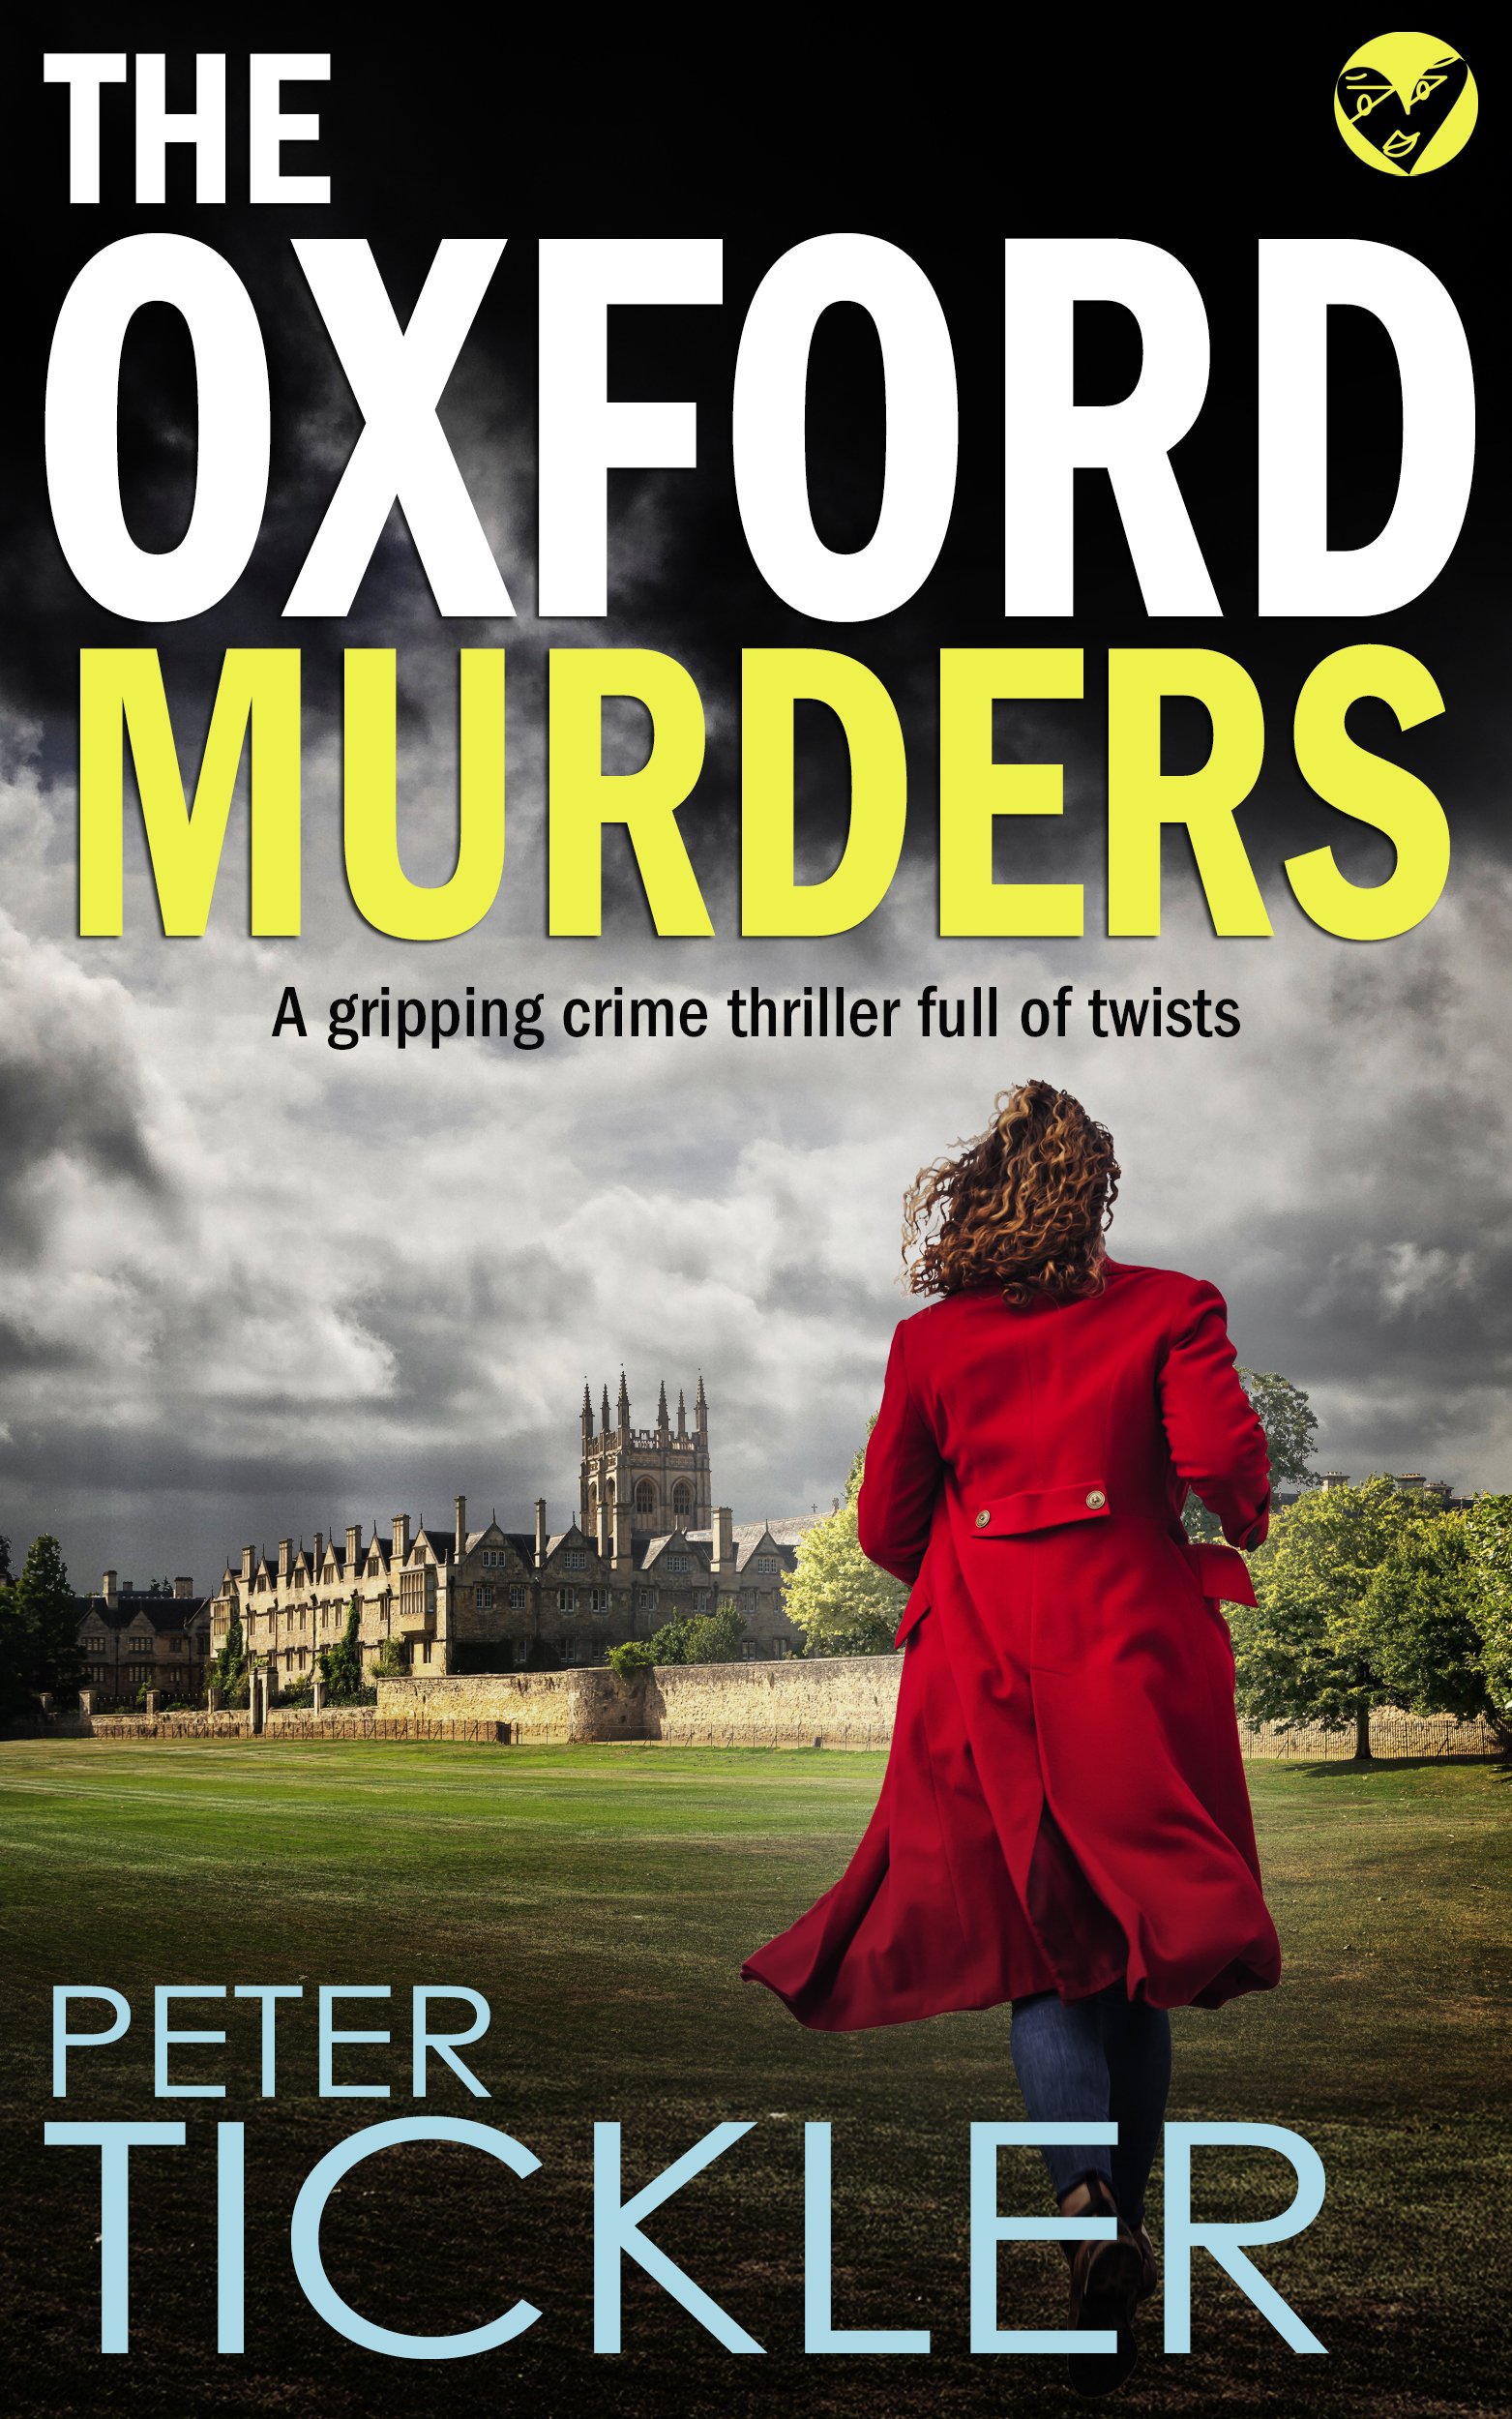 THE OXFORD MURDERS Cover publish.jpg